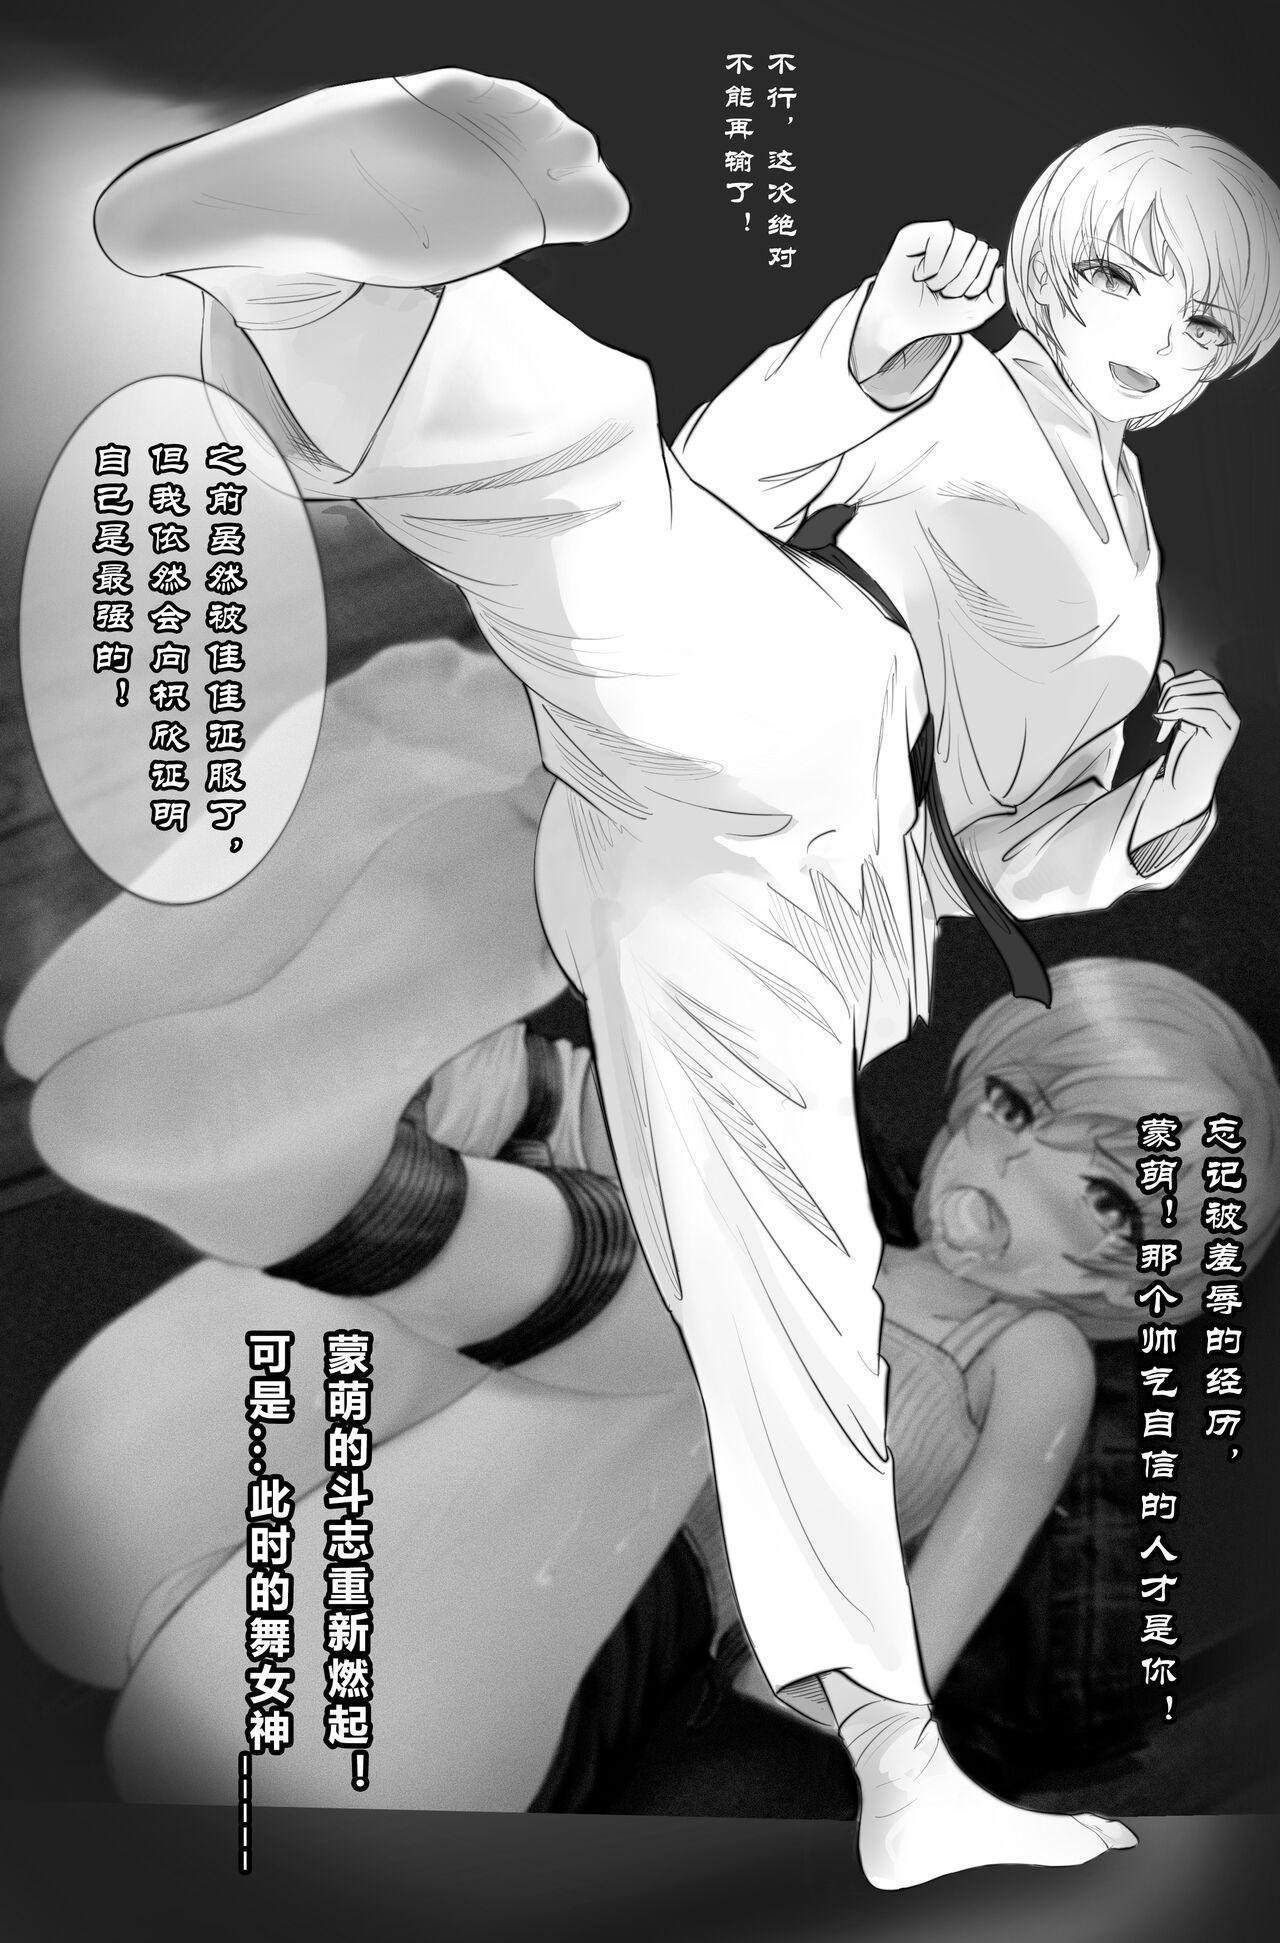 Man GOAT-goat Ⅴ special chapter - Original Flashing - Page 3